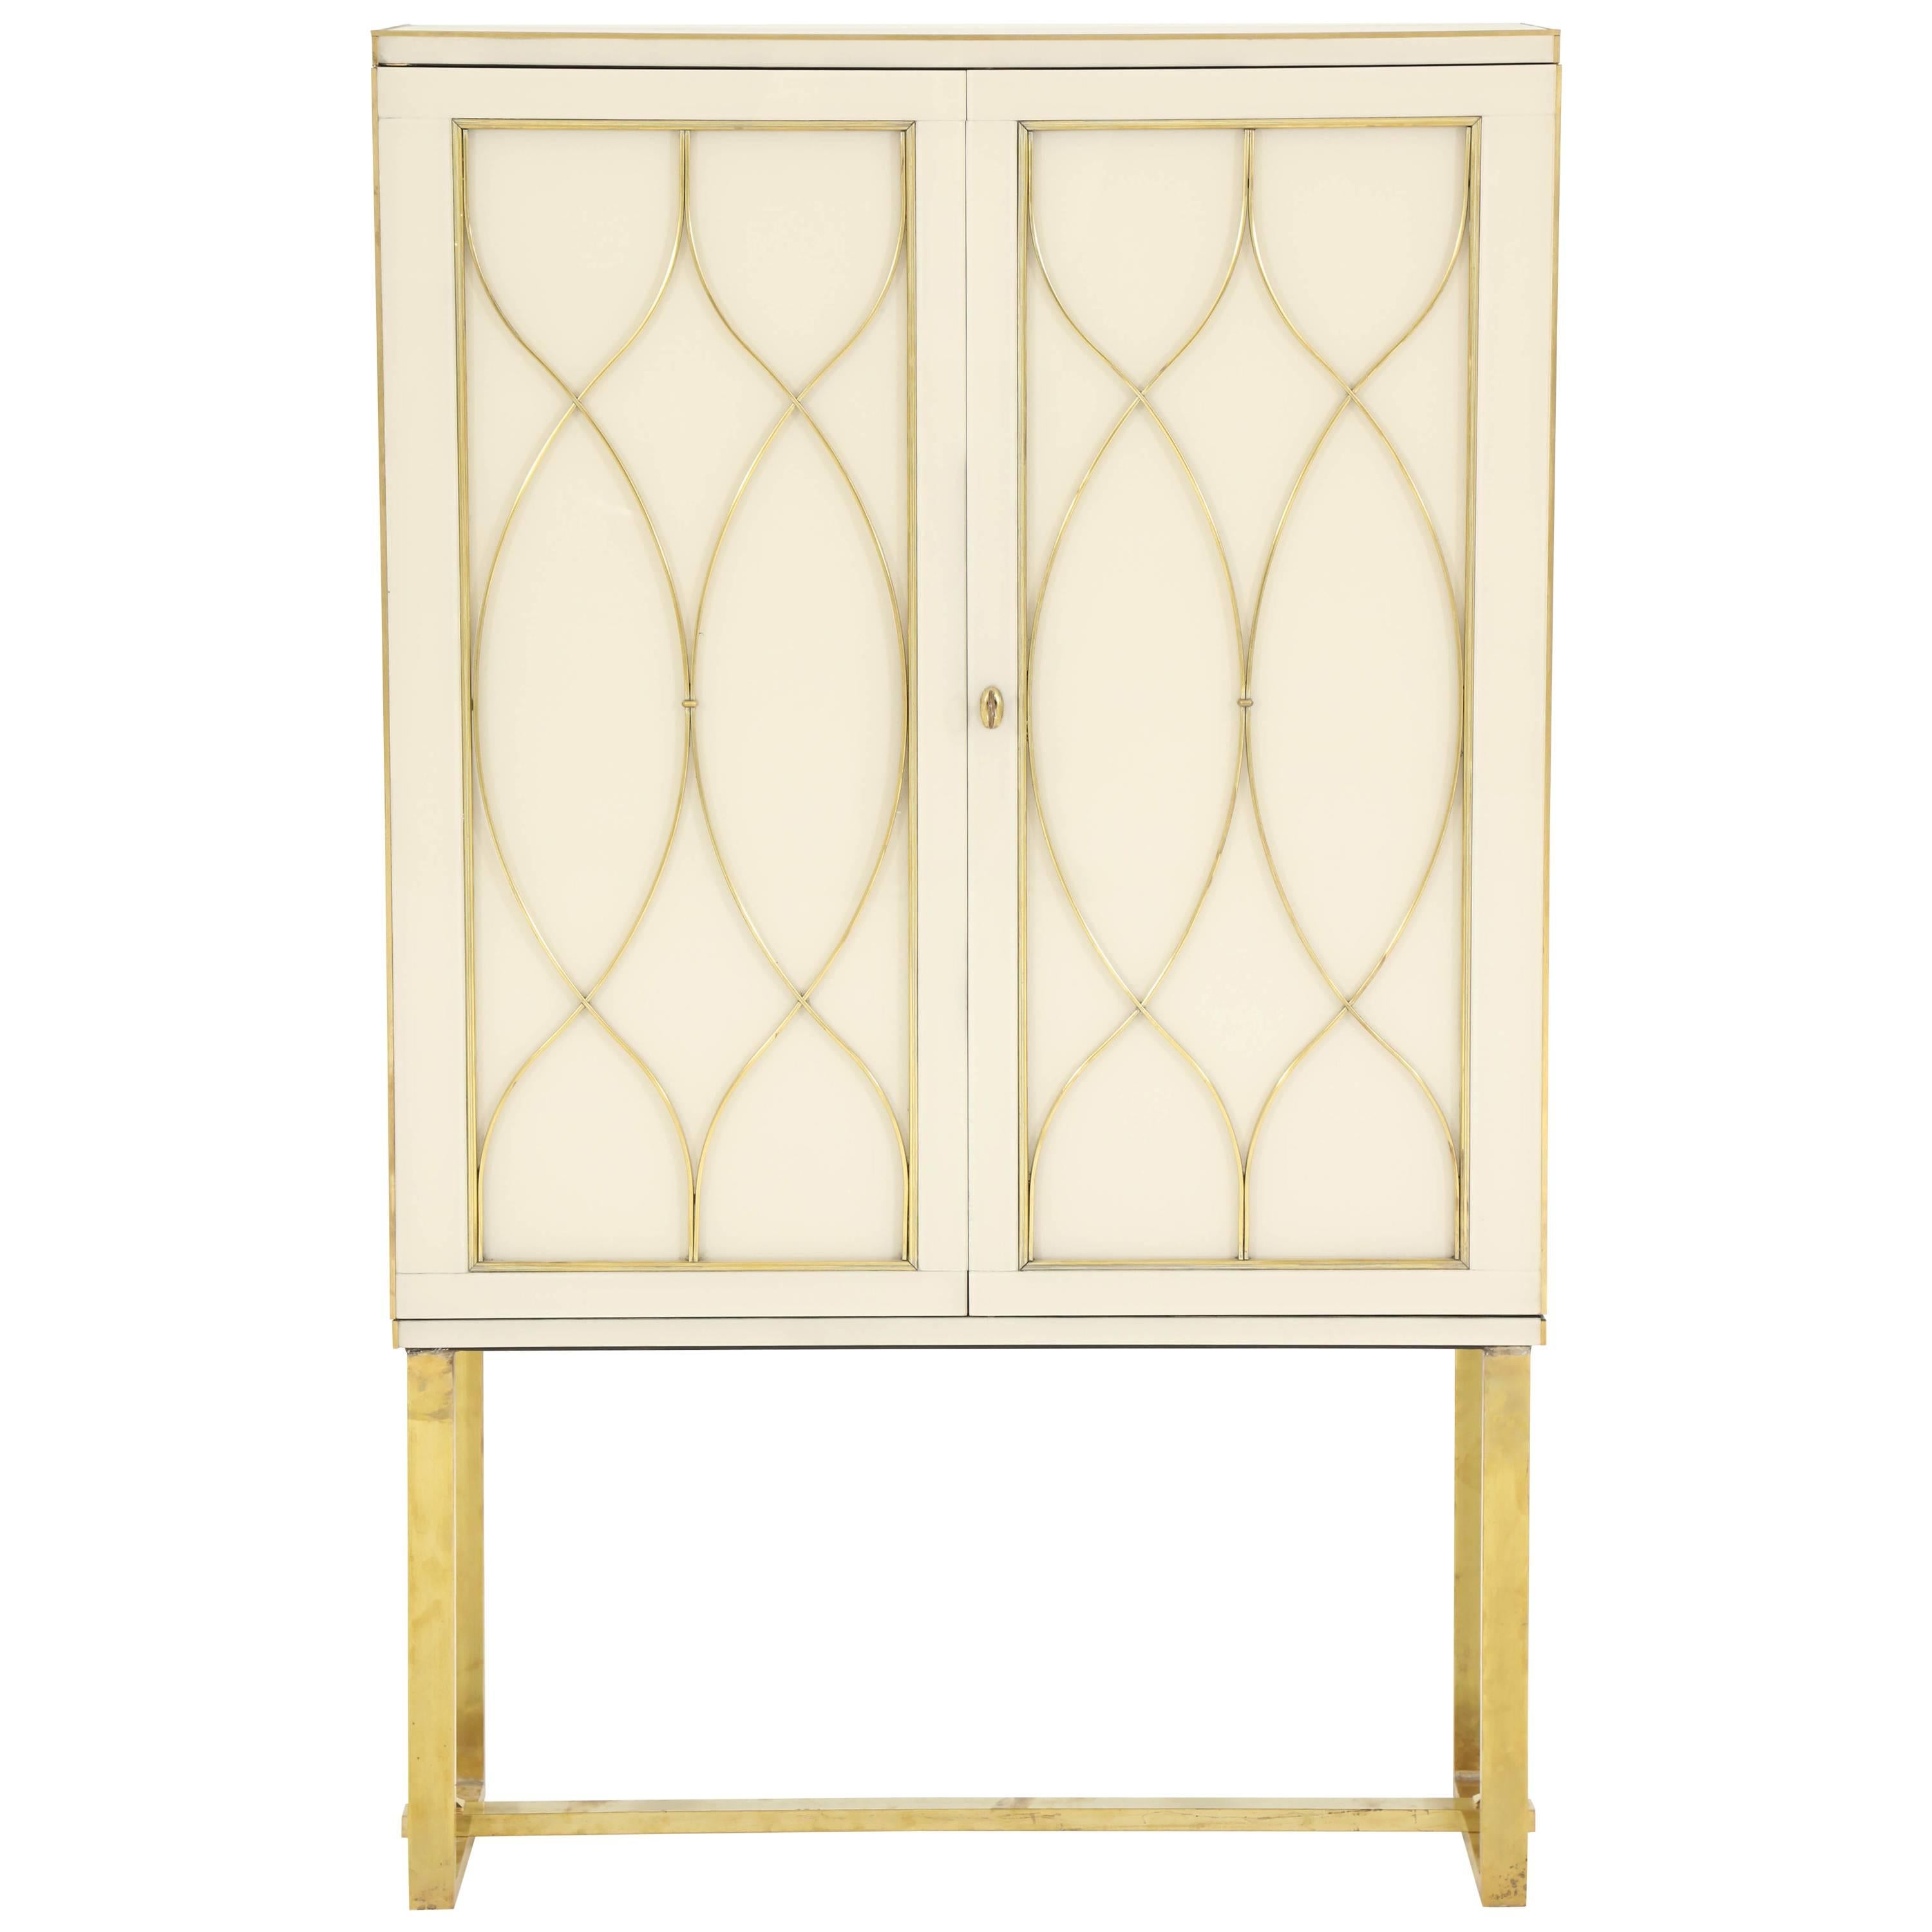 Mid-Century Ivory Opaline Glass Cabinet or Bar with Brass Inlays, Italy